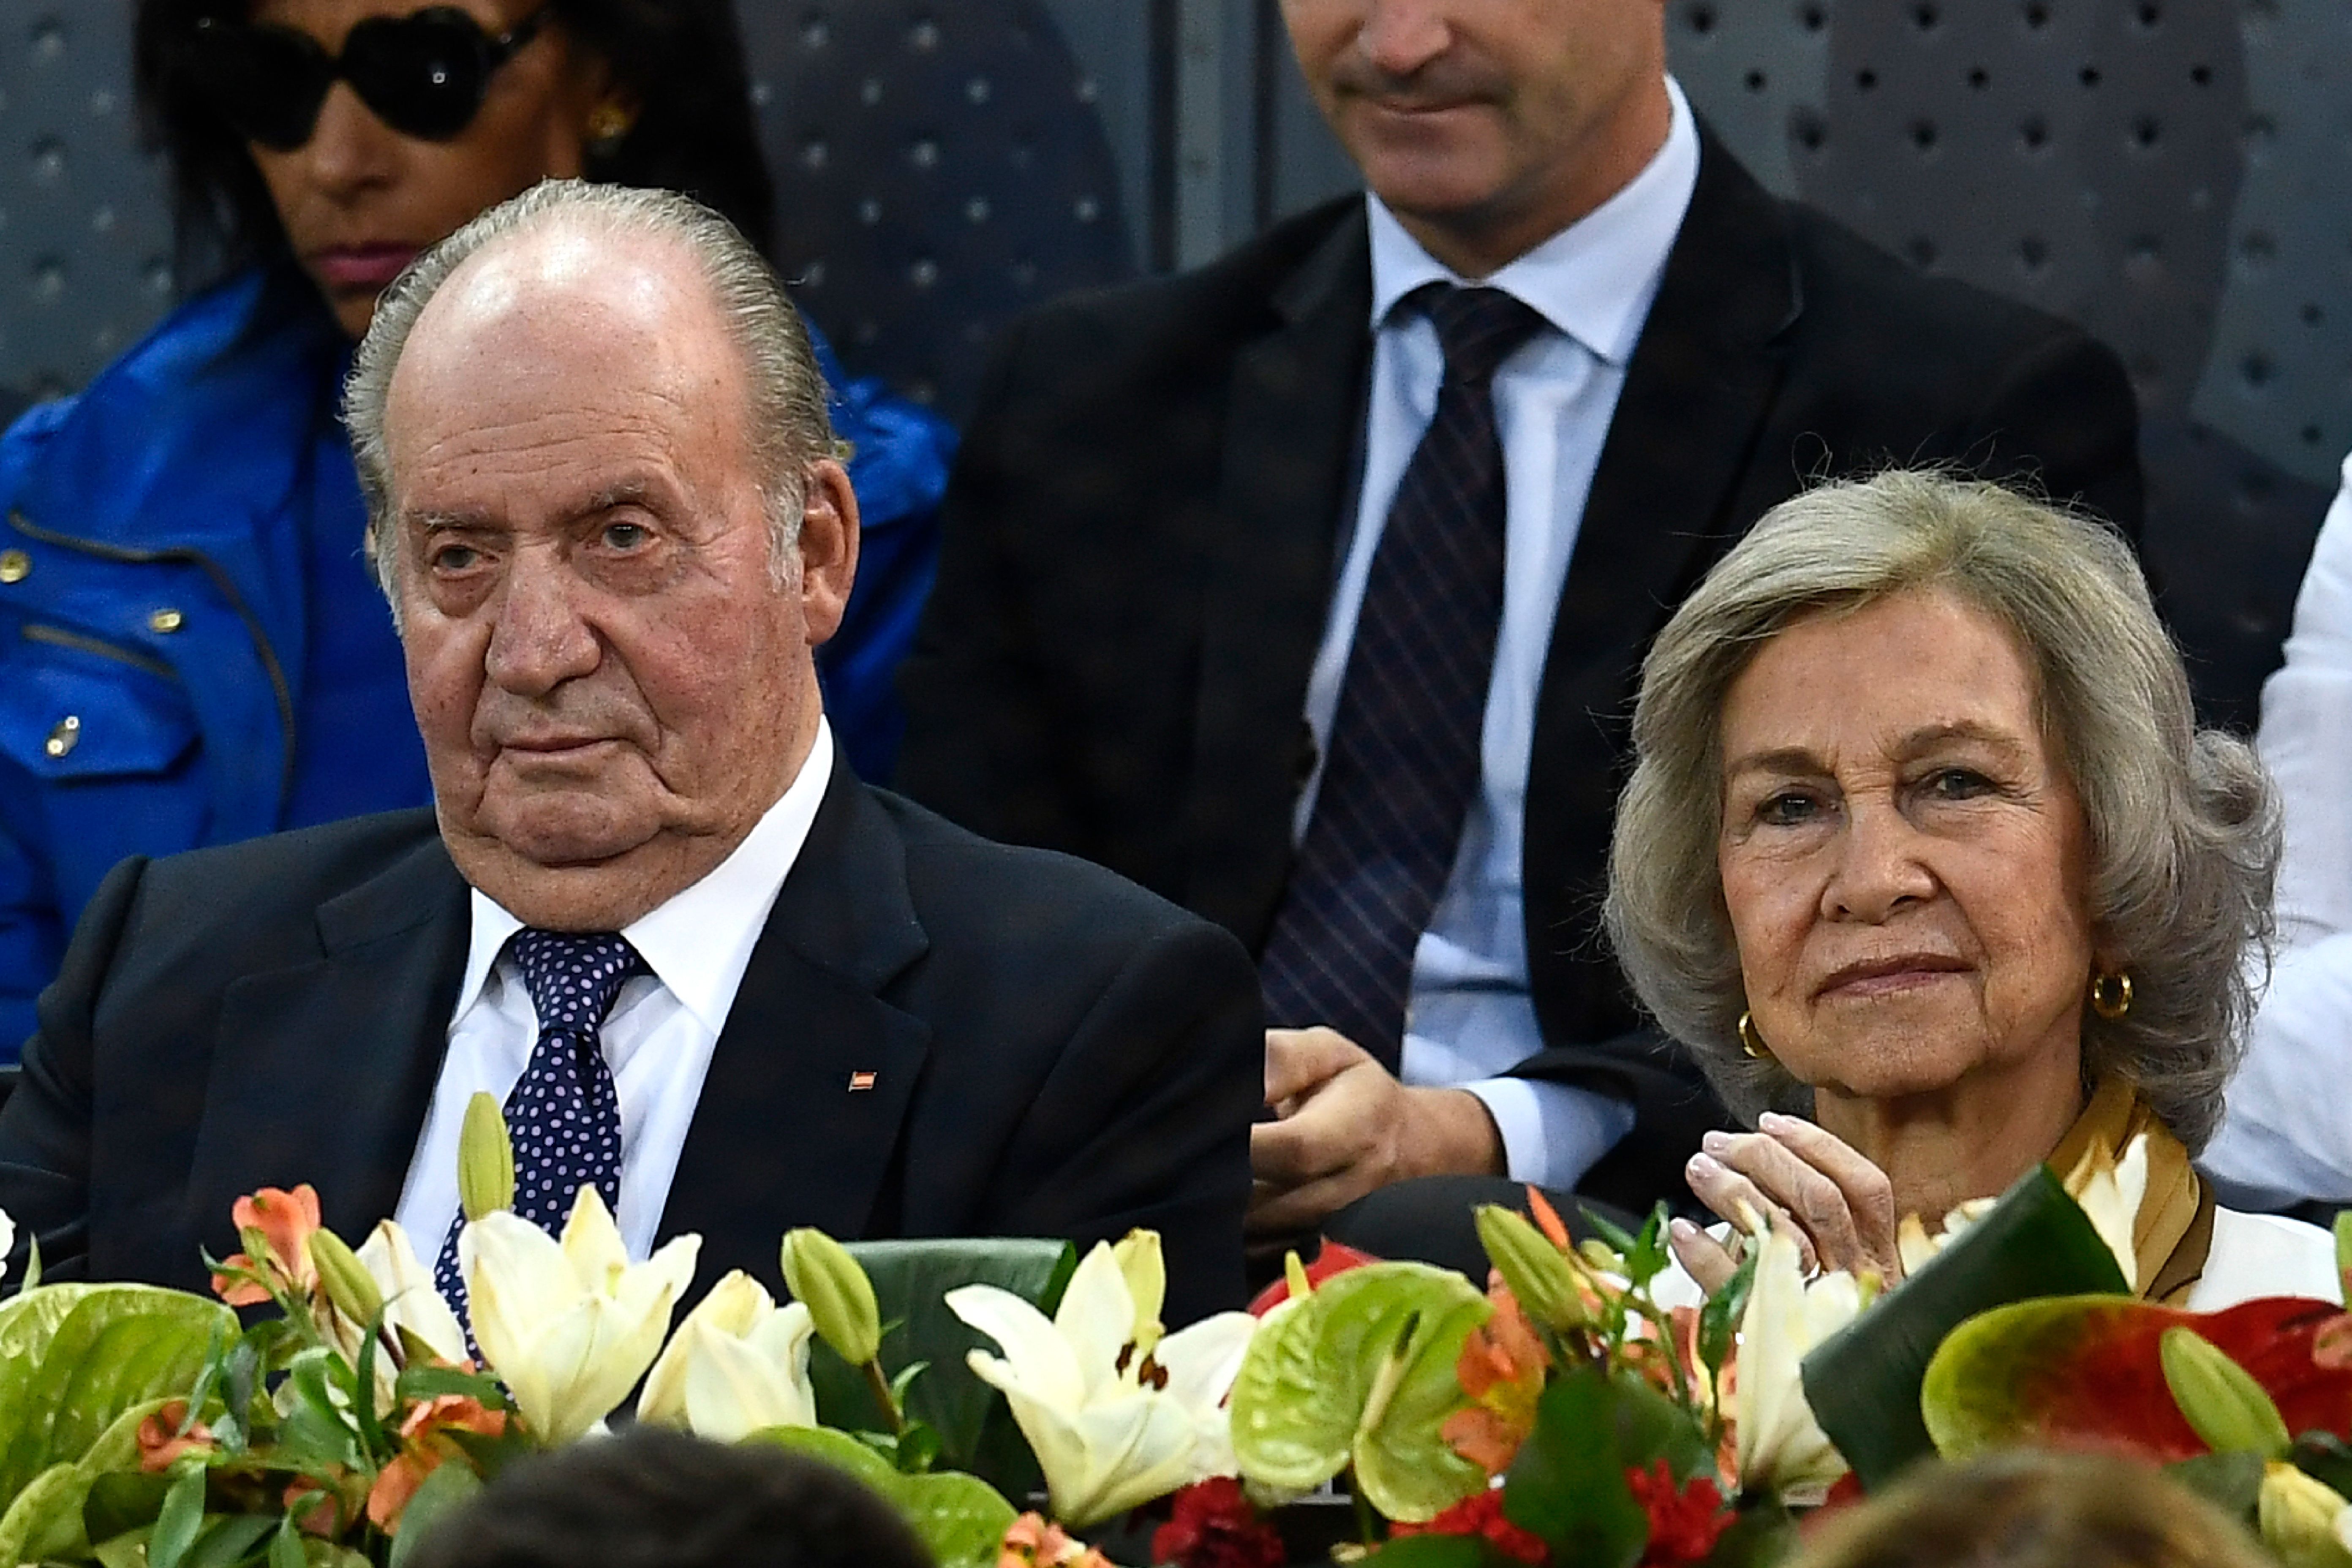 Former King Juan Carlos and Queen Sofia during an ATP Madrid Open semi-final tennis match on May 11, 2019 at the Caja Magica in Madrid. | Source: Getty Images